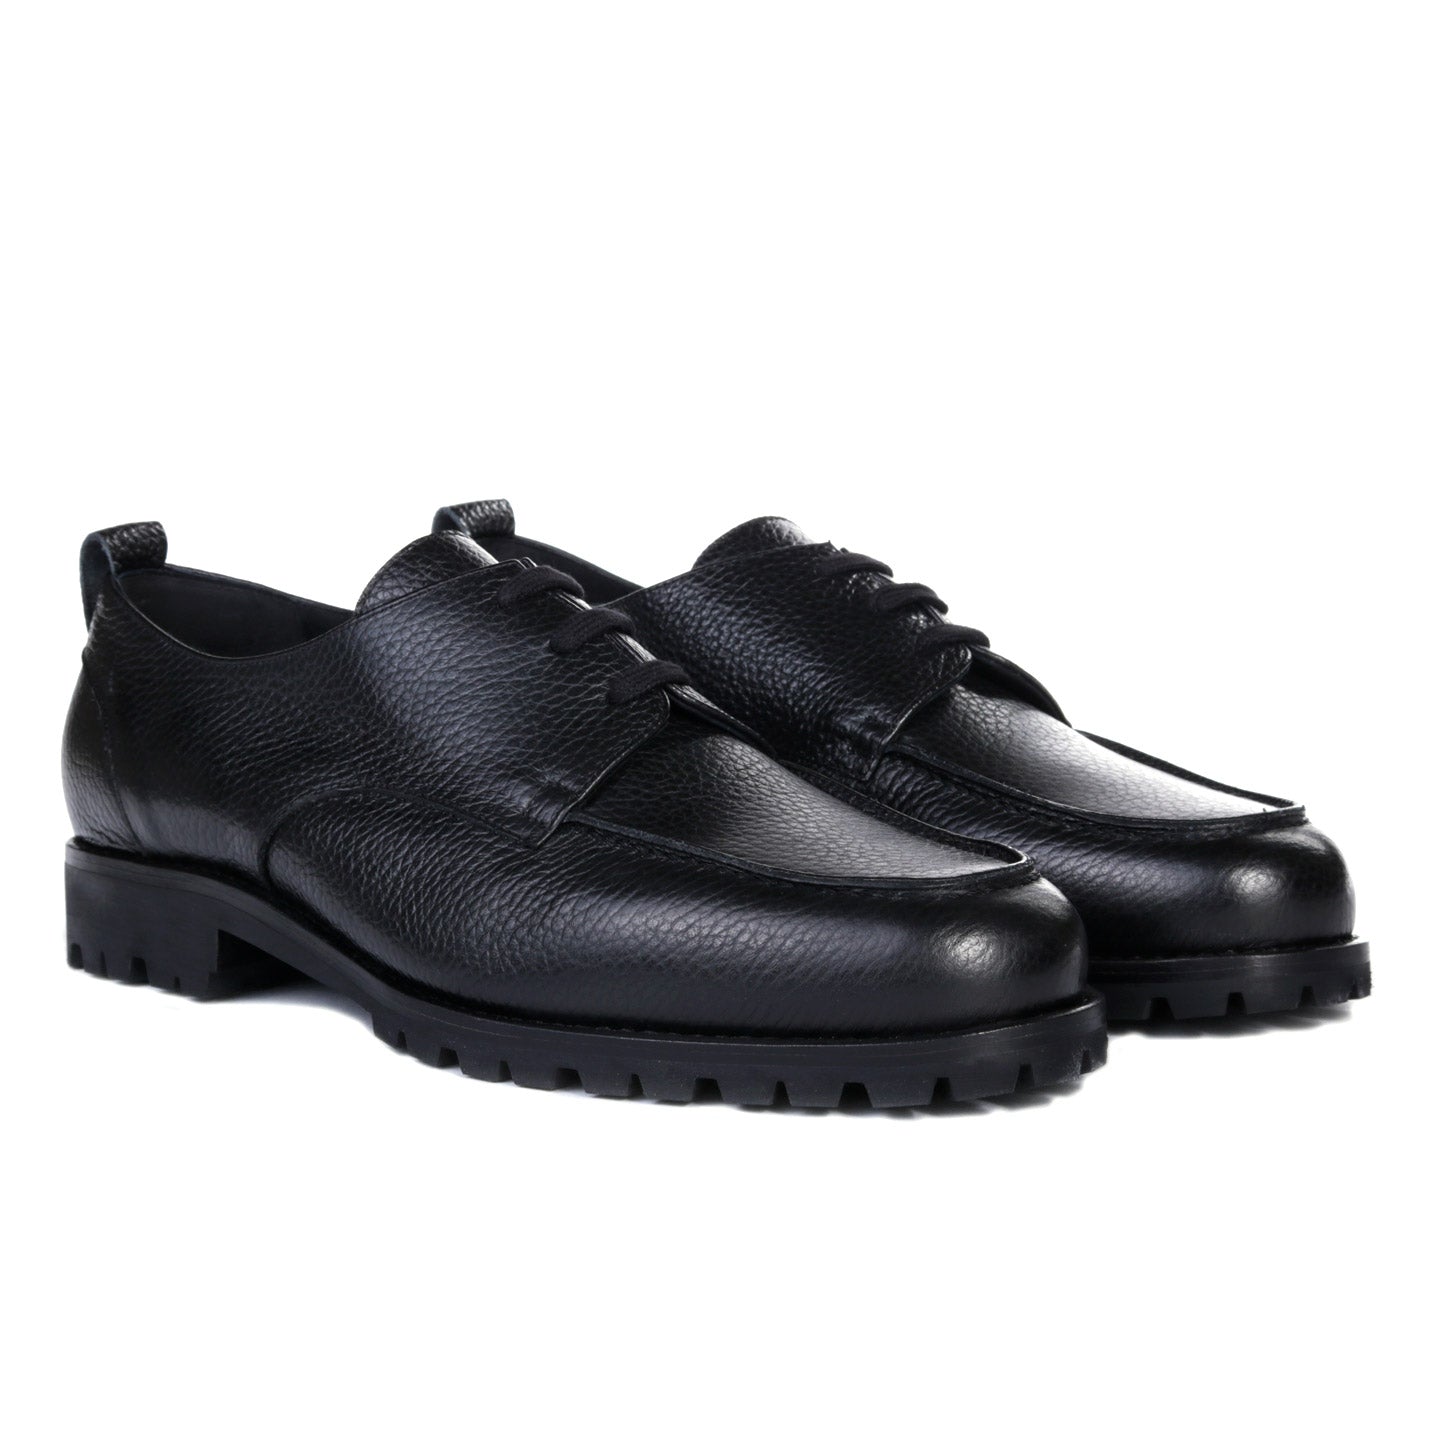 A KIND OF GUISE AVOLA DERBY BLACK LEATHER